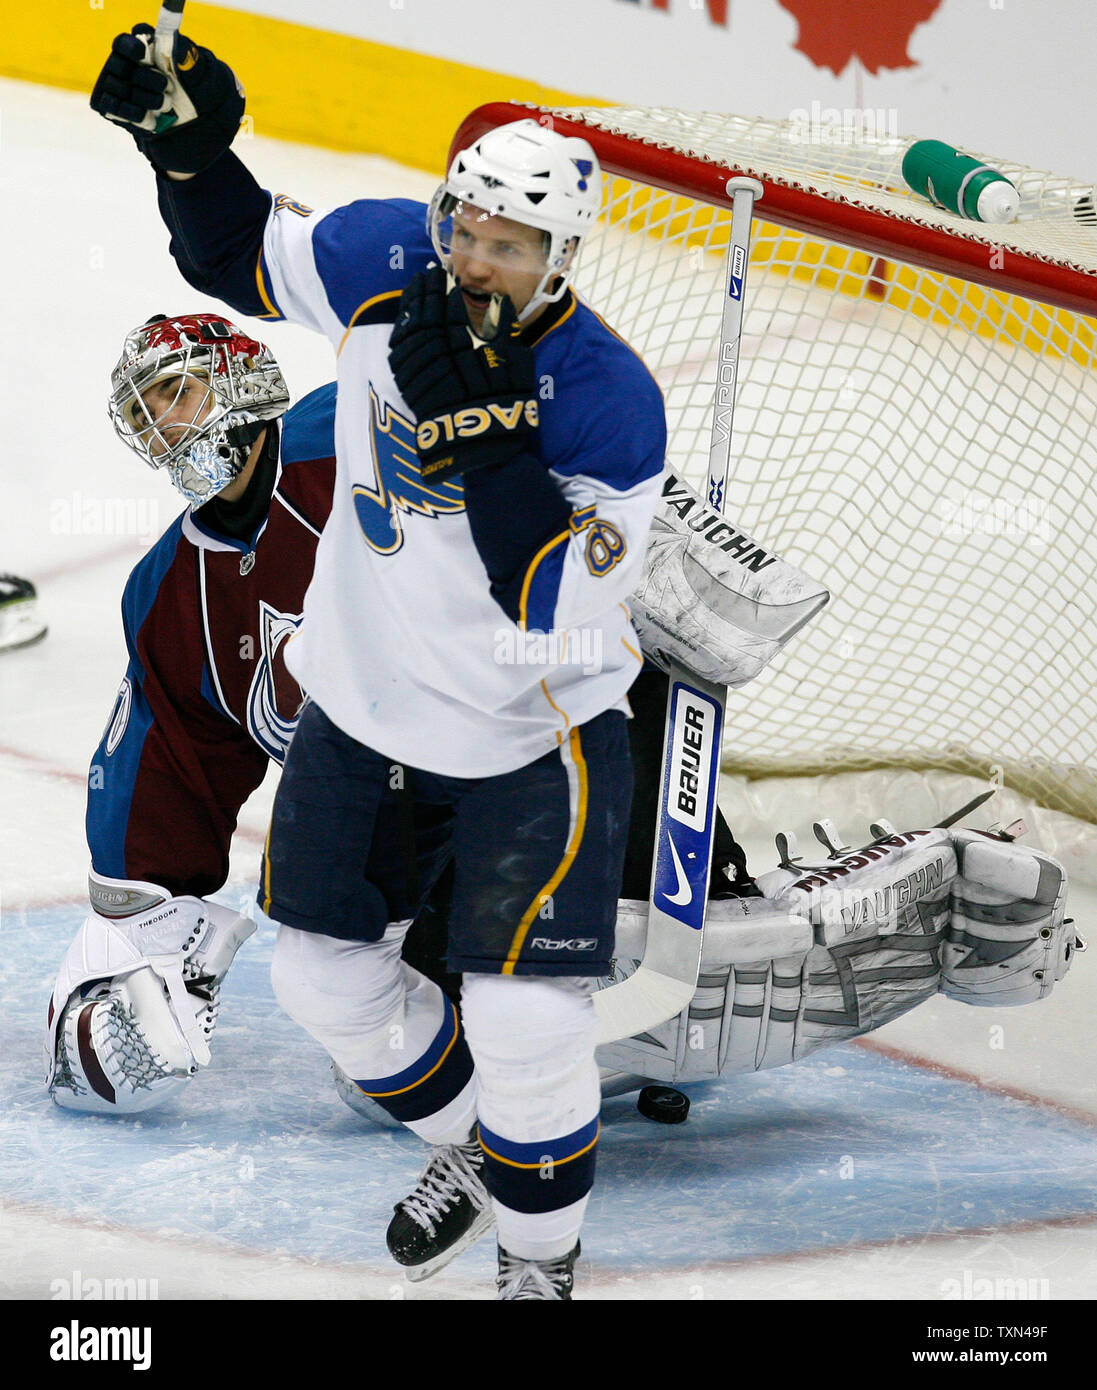 St. Louis Blues center Jay McClement celebrates teammate's goal in front of Colorado Avalanche goalie Jose Theodore during the first period at the Pepsi Center in Denver on February 14, 2008.  (UPI Photo/Gary C. Caskey) Stock Photo